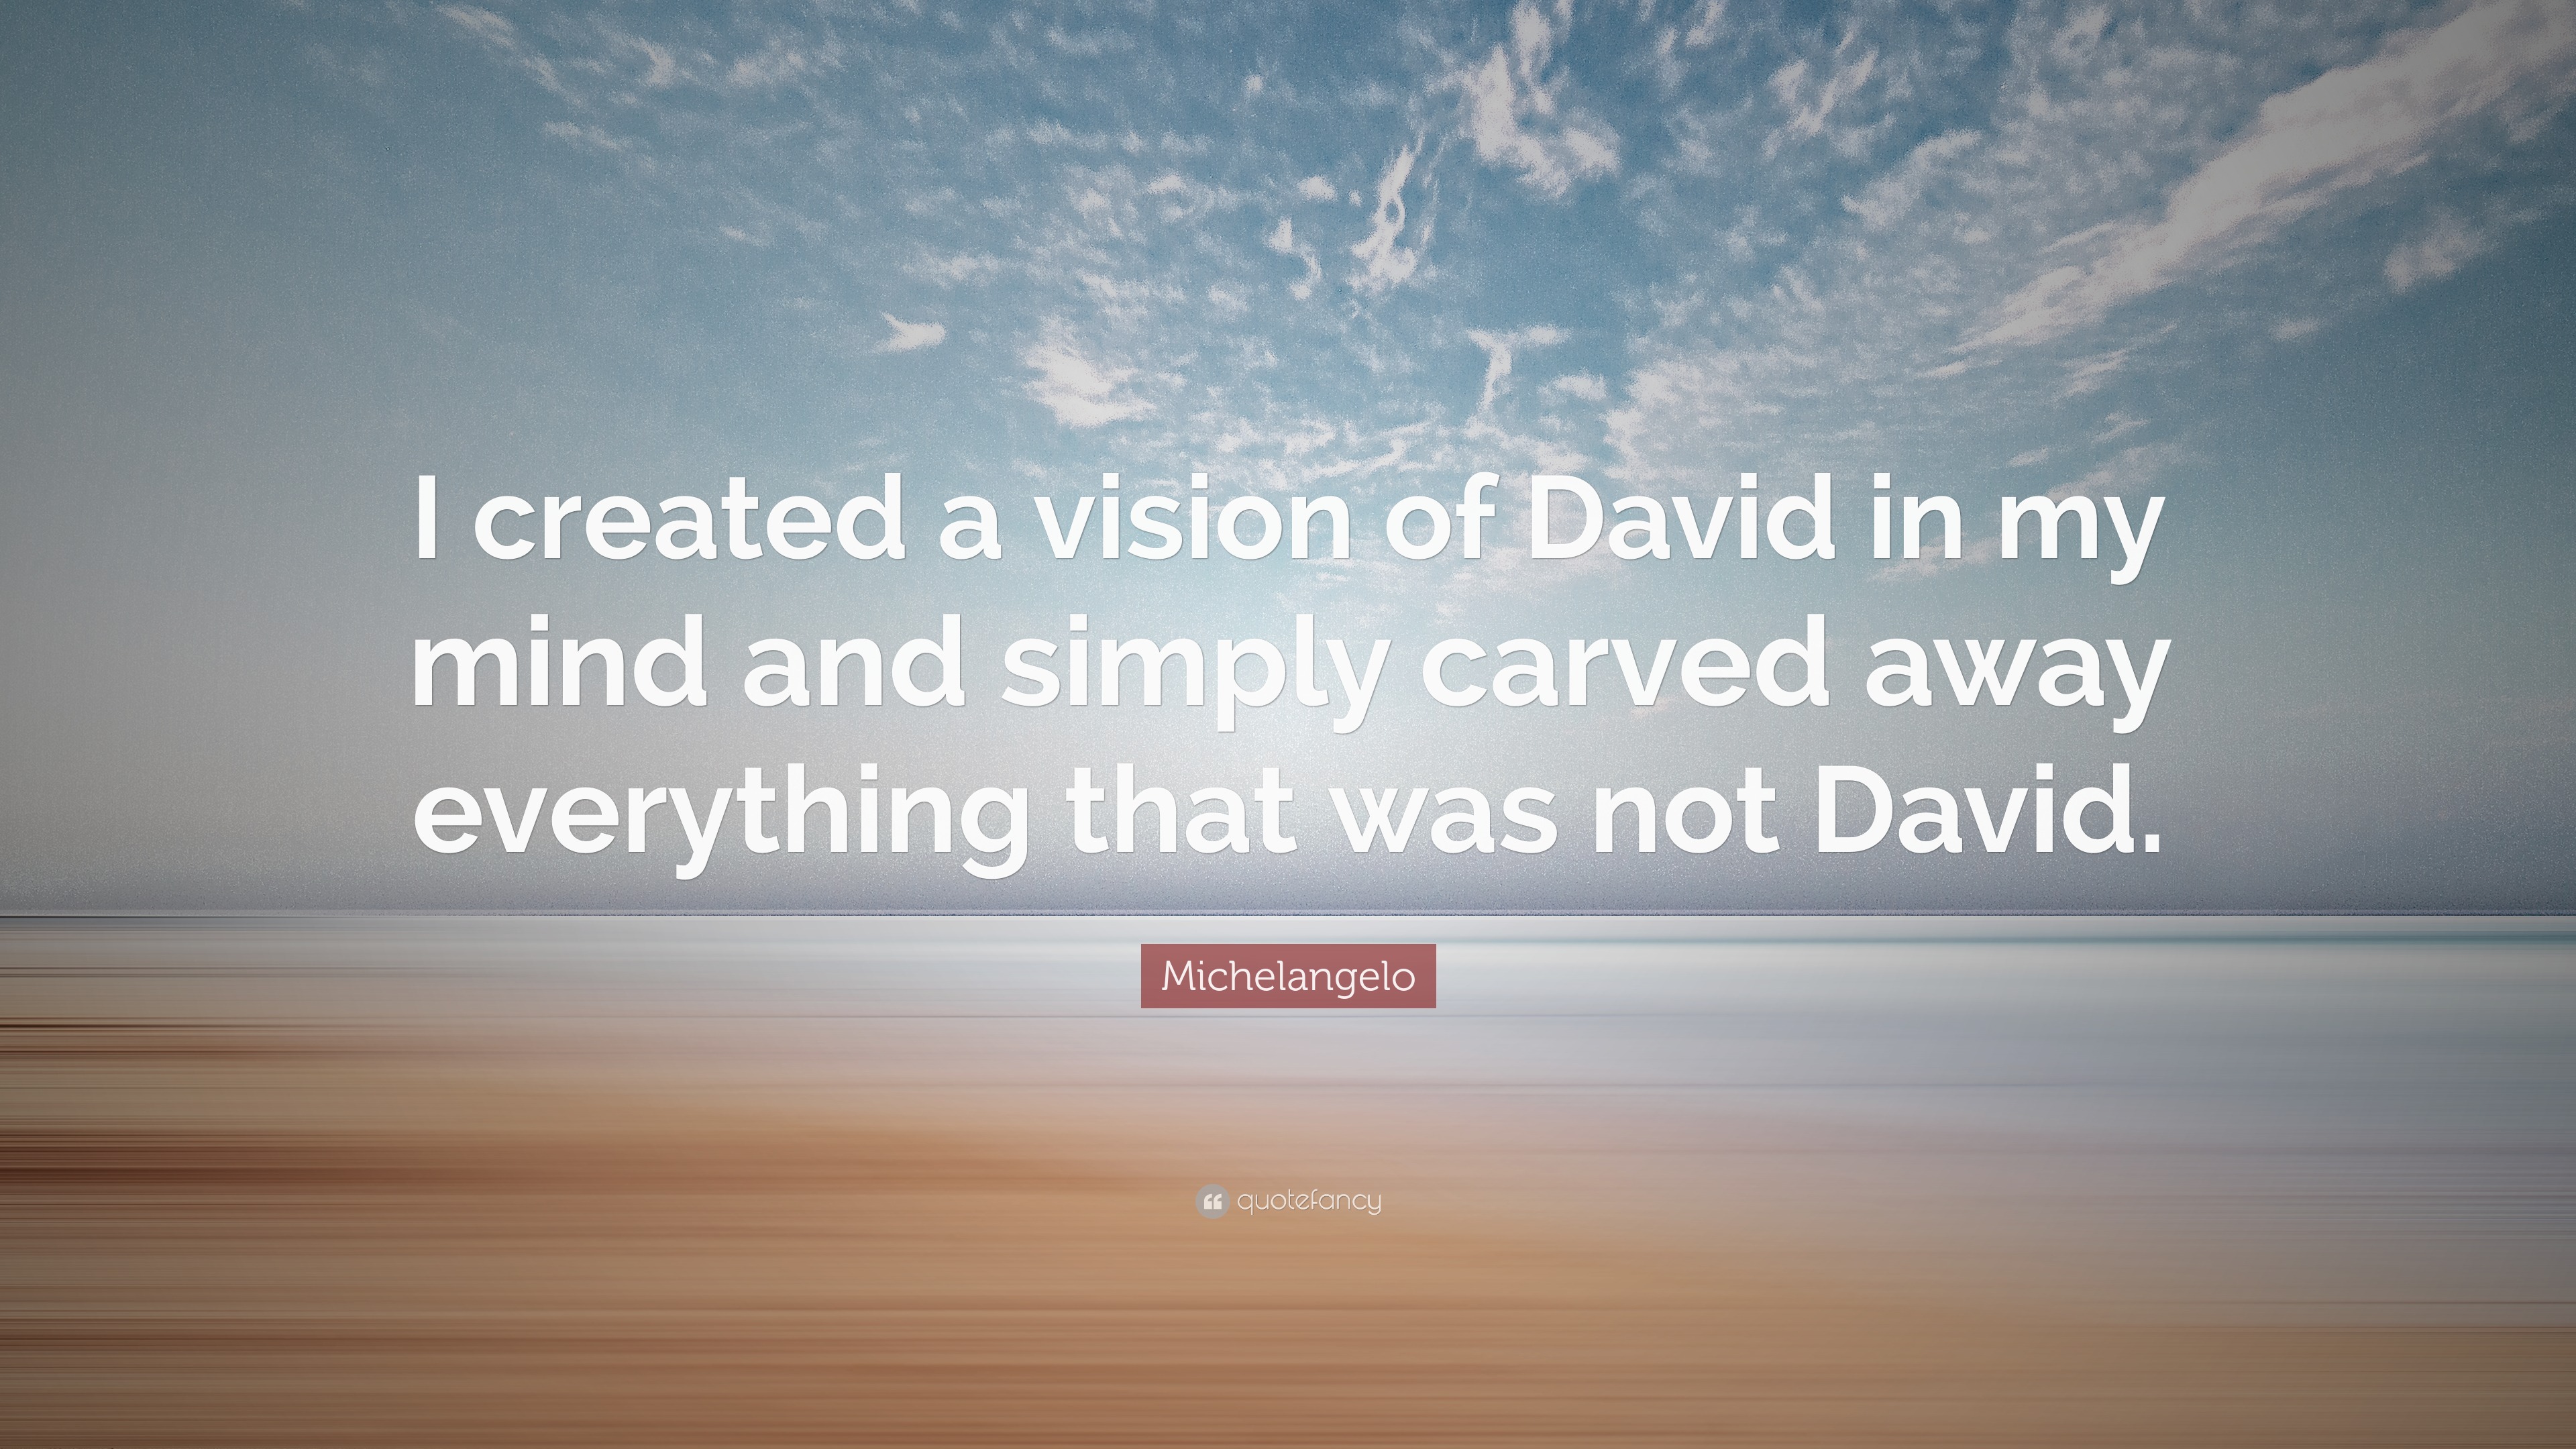 Michelangelo Quote: "I created a vision of David in my mind and simply carved away everything ...